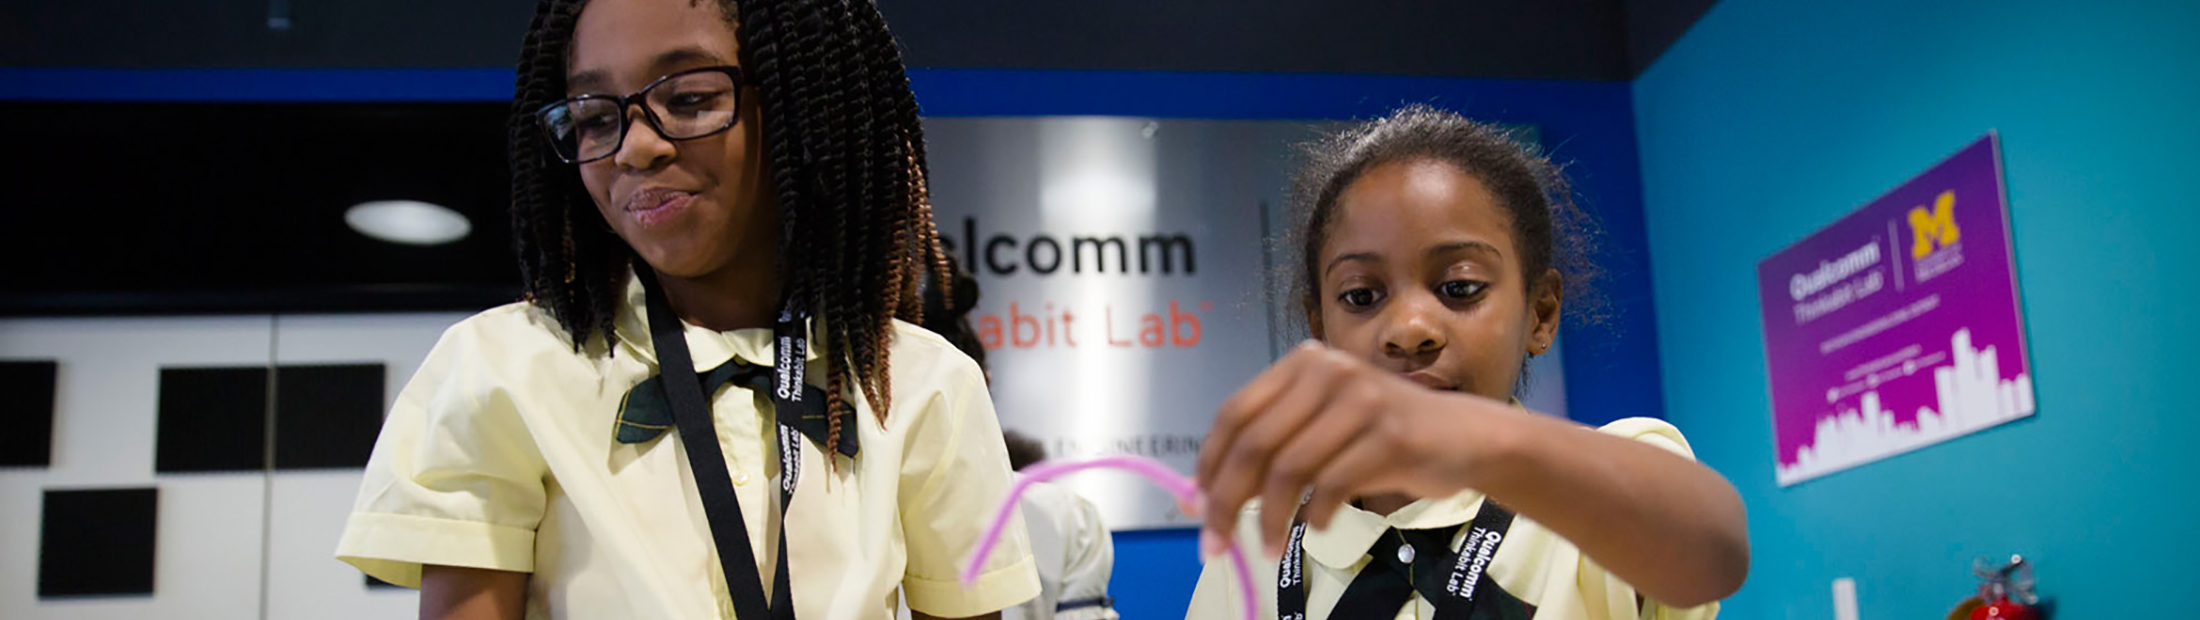 Image of two Fourth graders from the Coleman A. Young Elementary School learning to program using Arduino kits